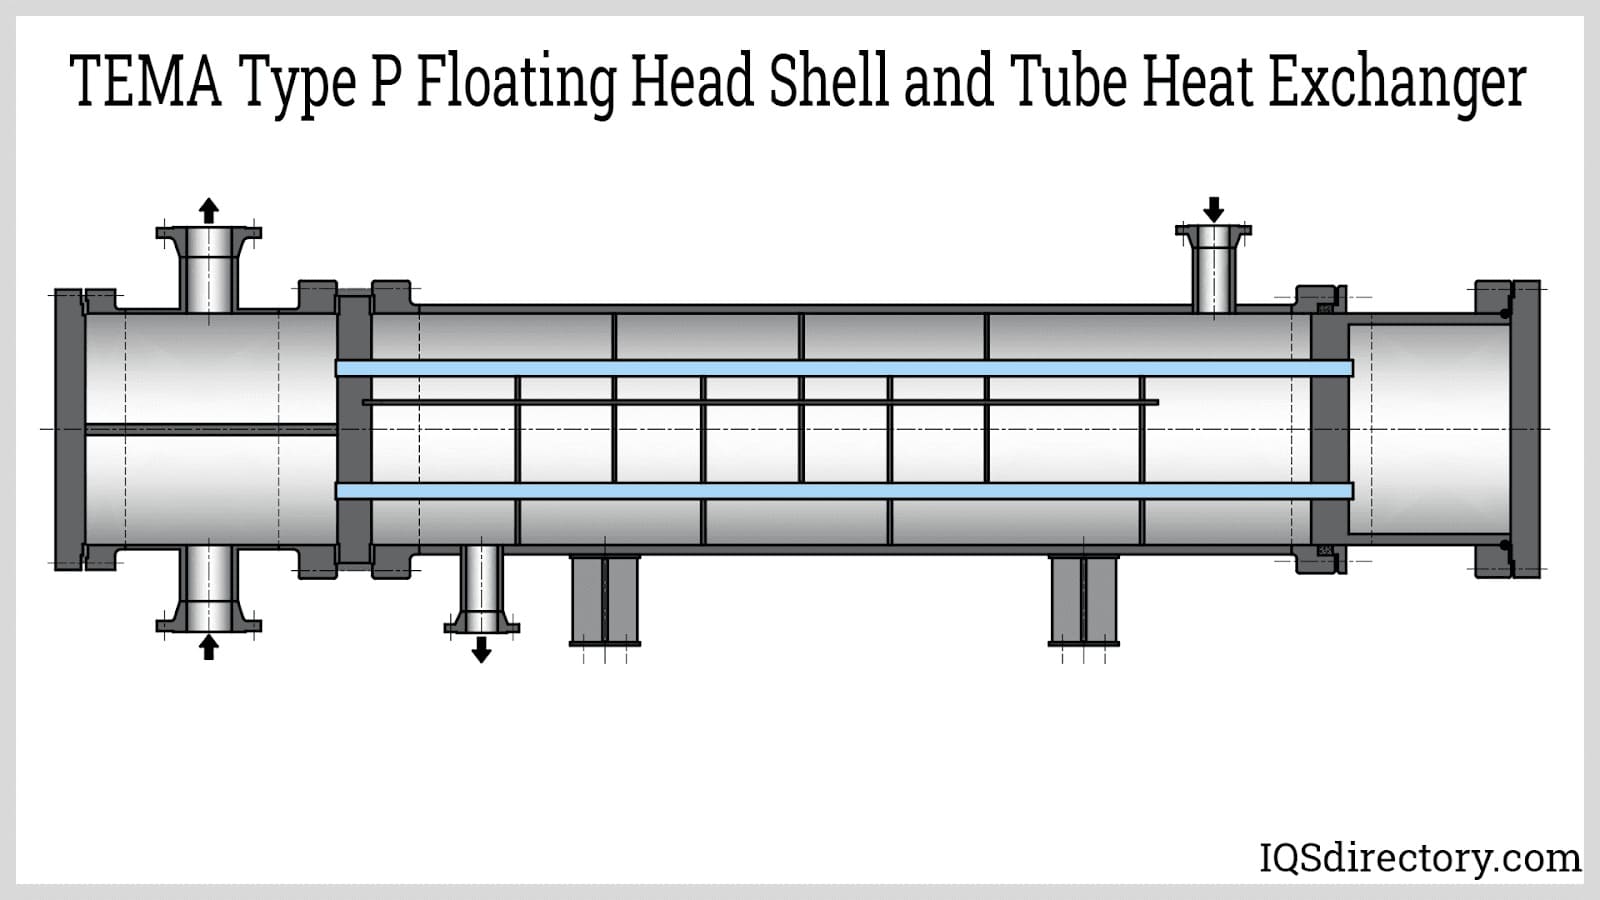 TEMA Type P Floating Head Shell and Tube Heat Exchanger